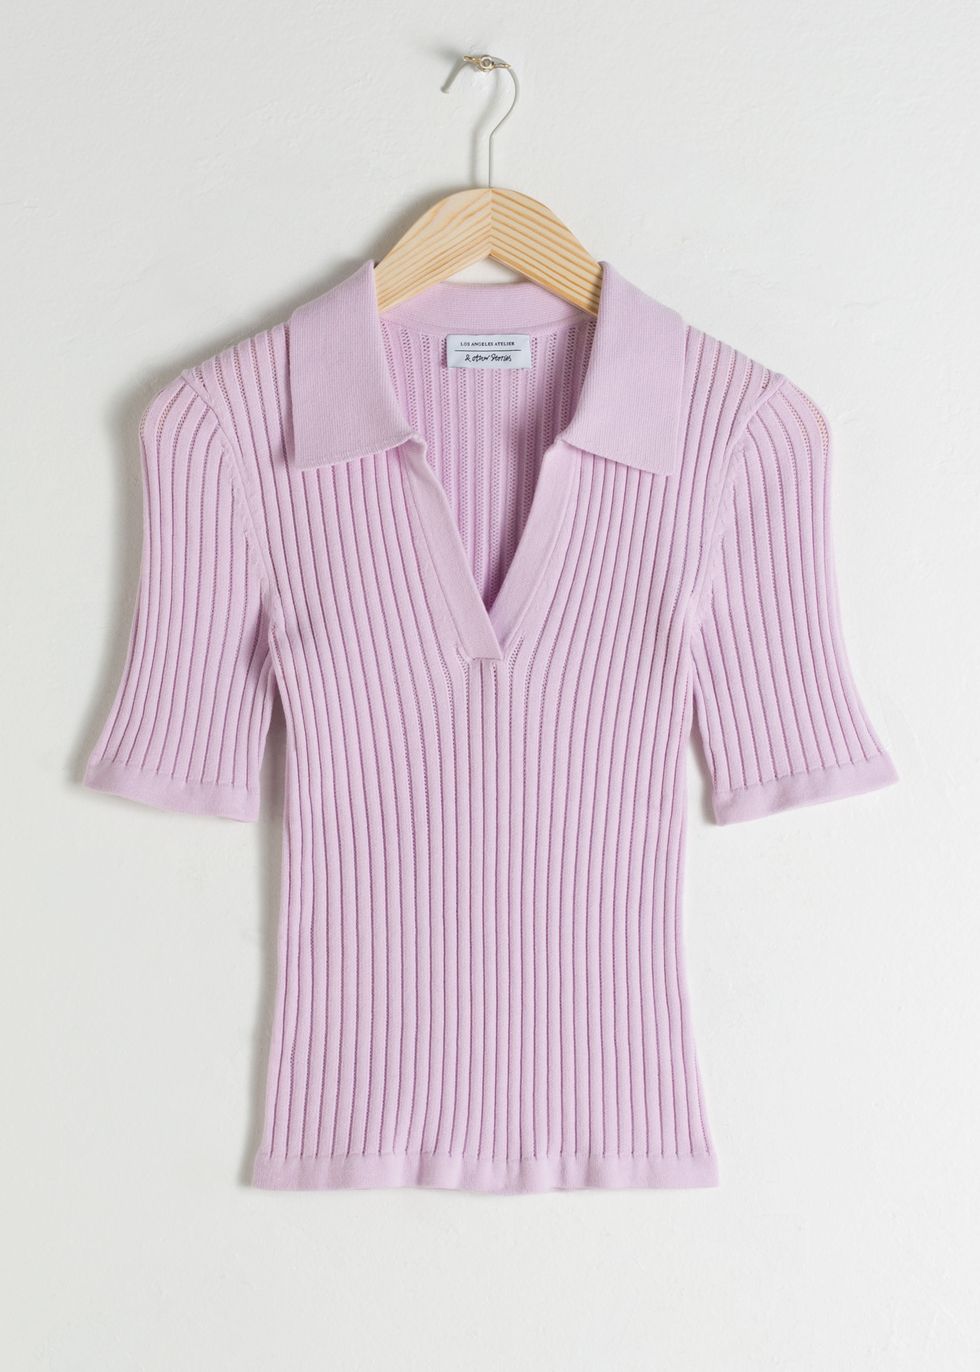 Clothing, White, Sleeve, Pink, Violet, Lilac, Purple, Lavender, Outerwear, Blouse, 